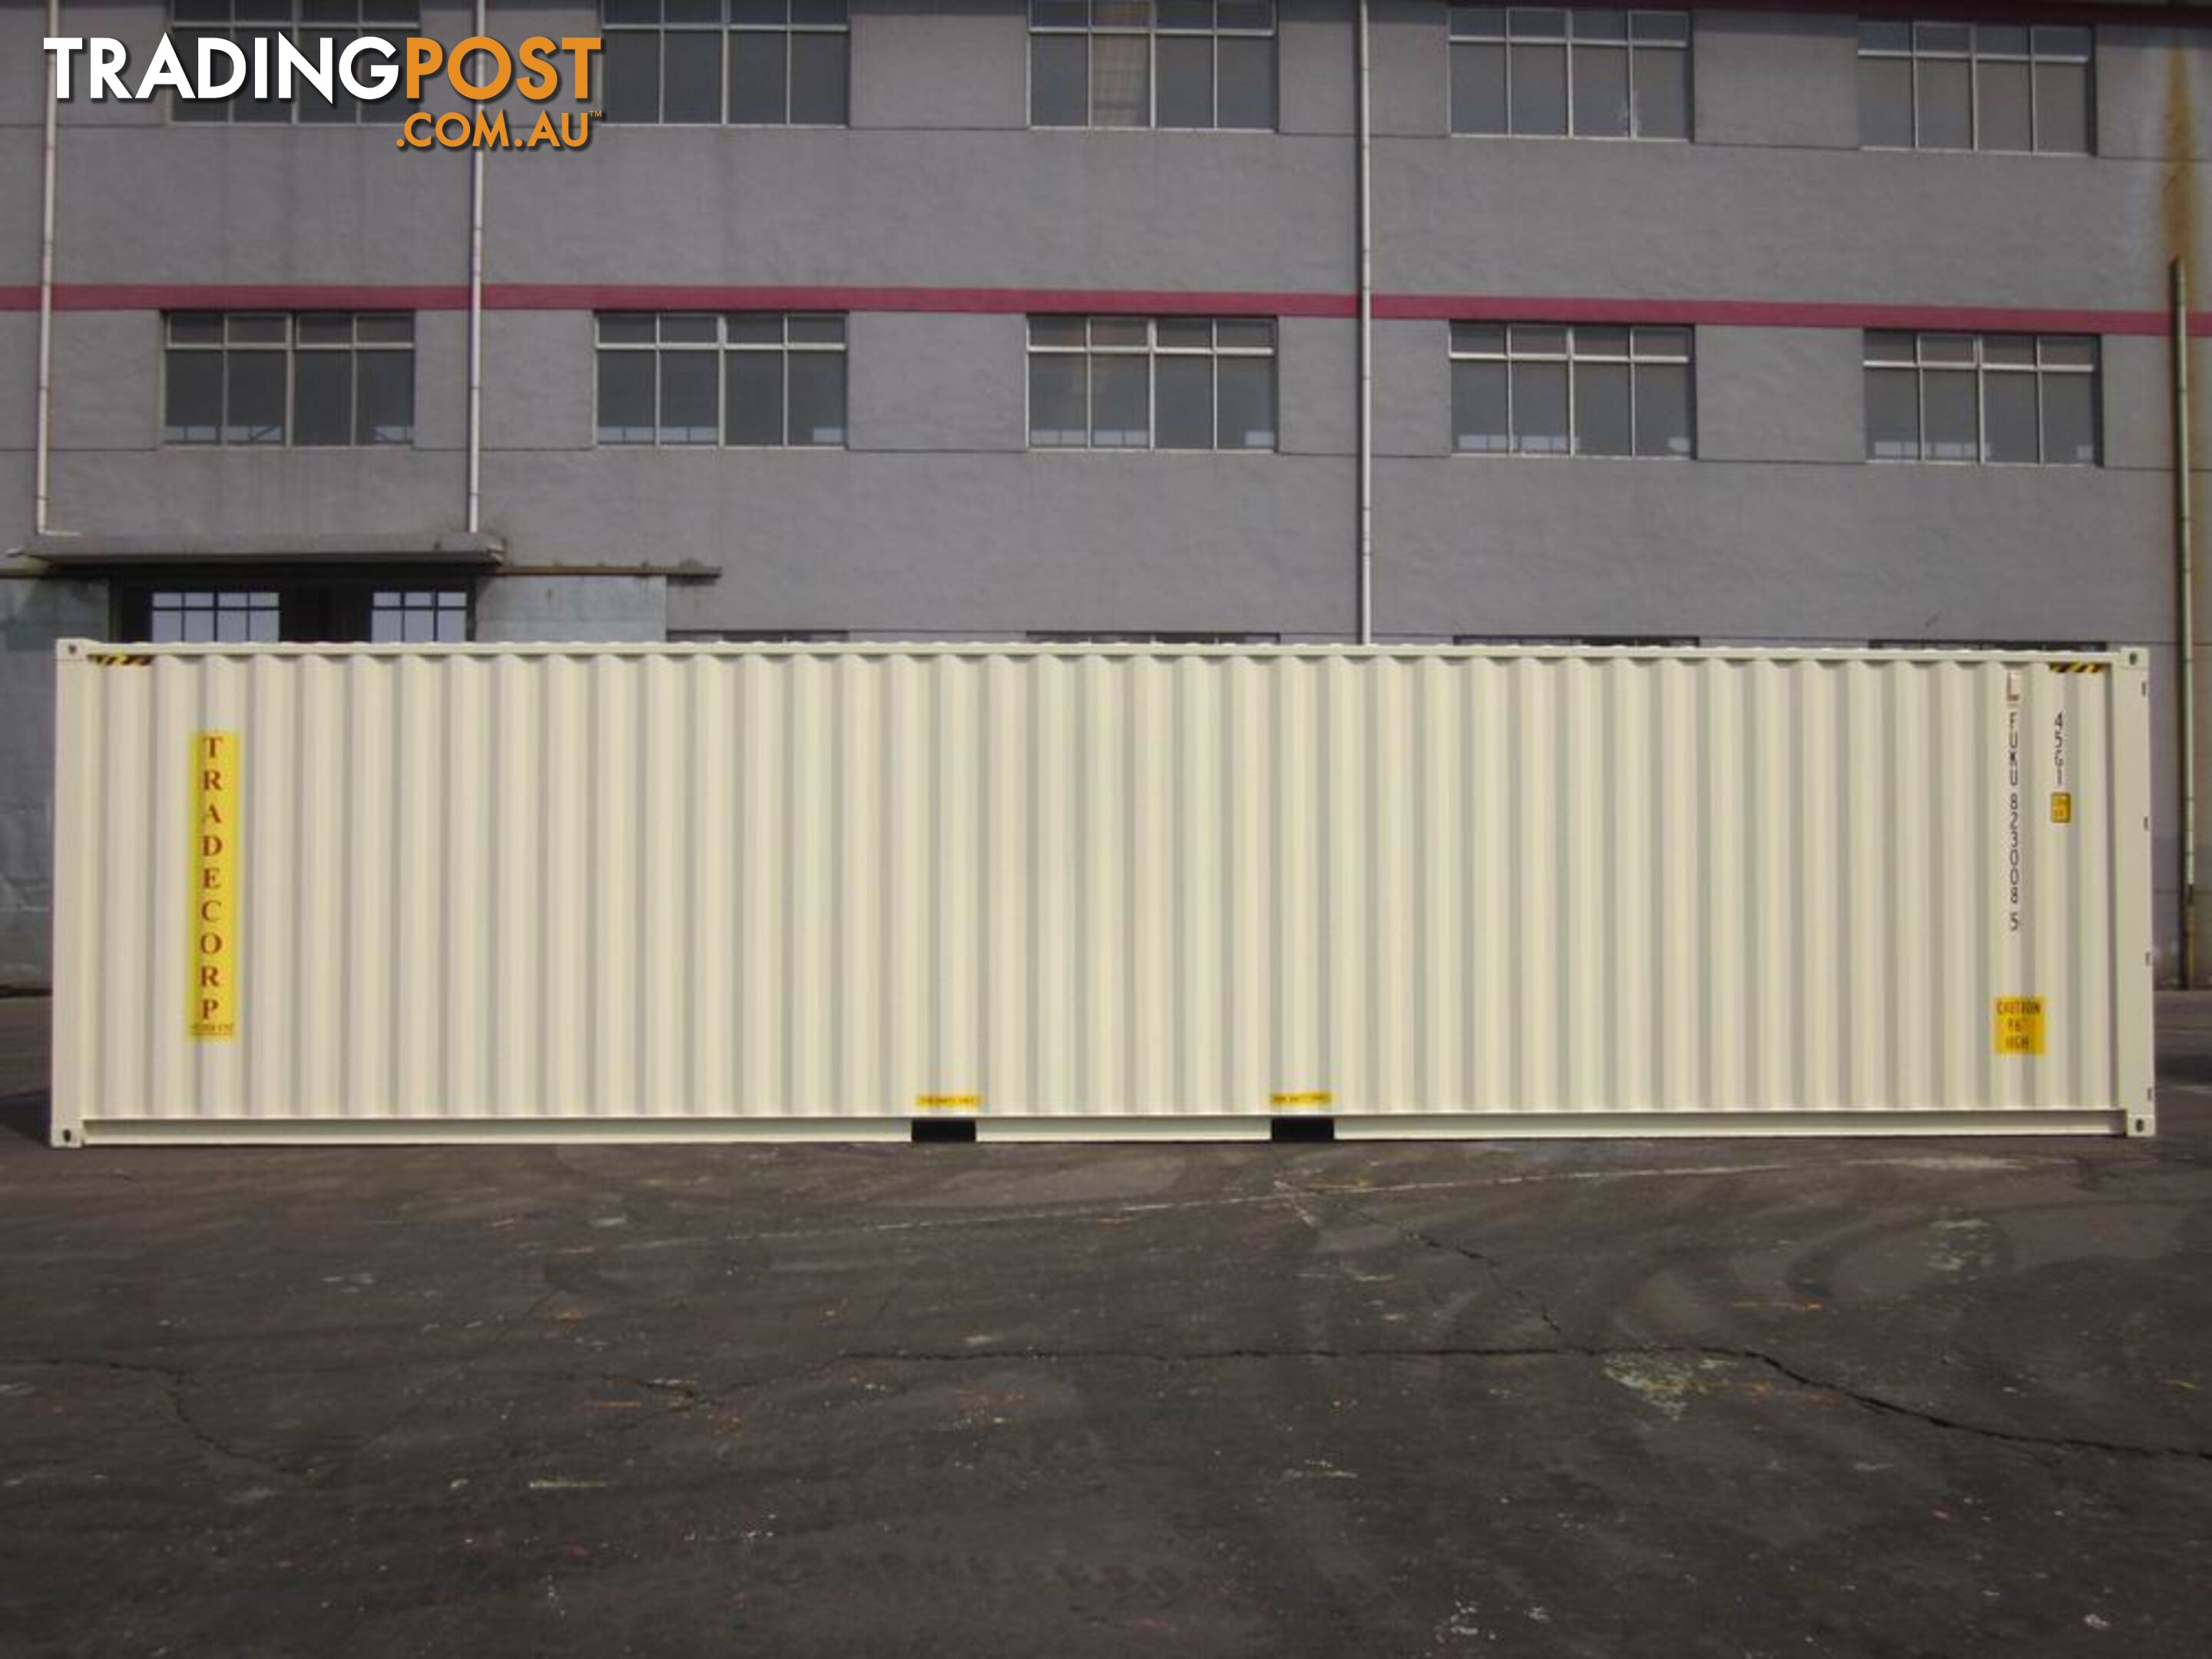 New 40ft High Cube Shipping Containers Tuggerah - From $7950 + GST